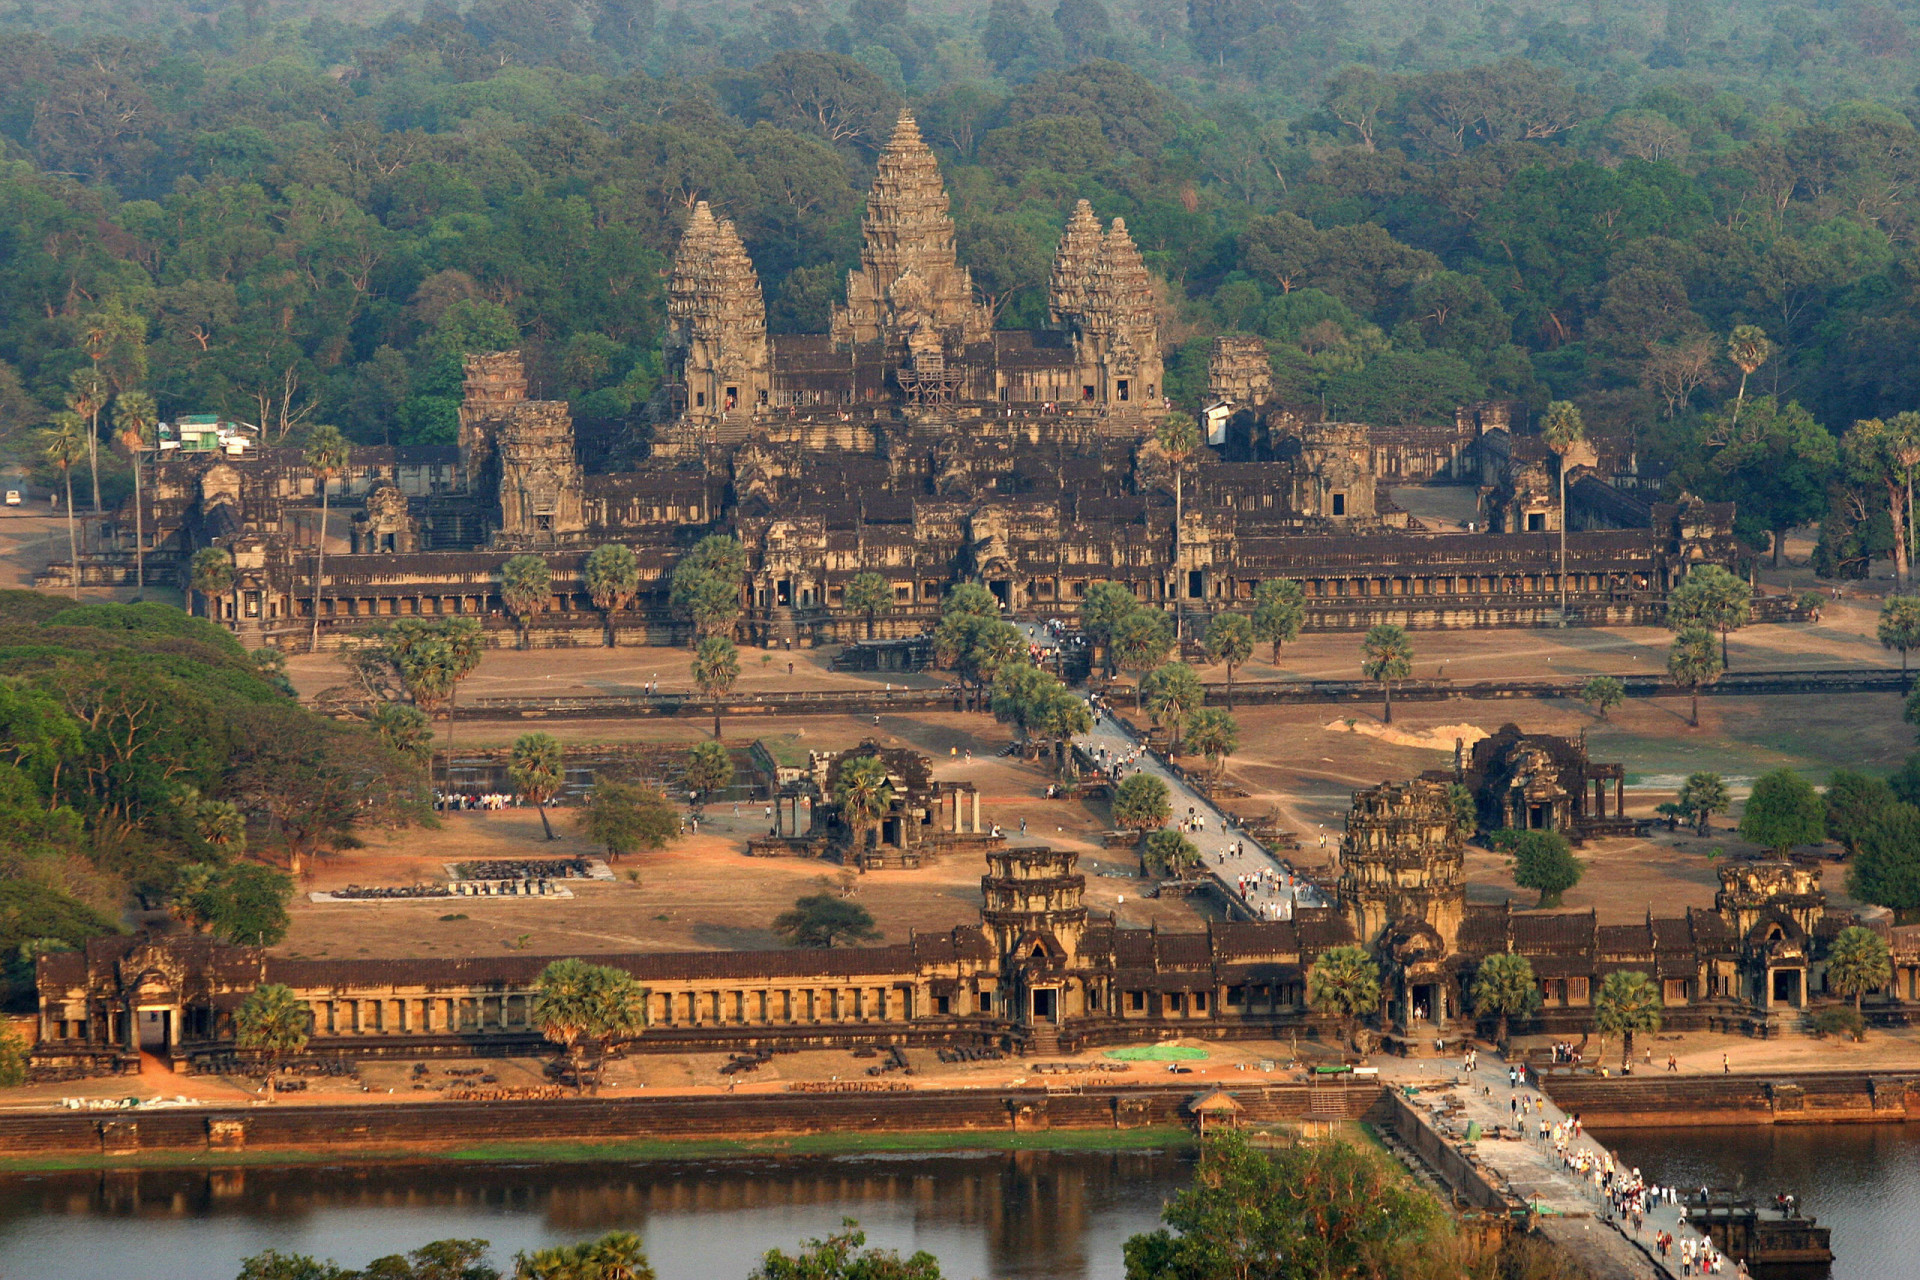 <p>Organized by the DreamMaker company for up to 50 people, this trip visits 20 cities, and goes to sites such as the Angkor ruins in Cambodia. Travel is on a private plane, and the trip costs a whopping US$18 million!</p>